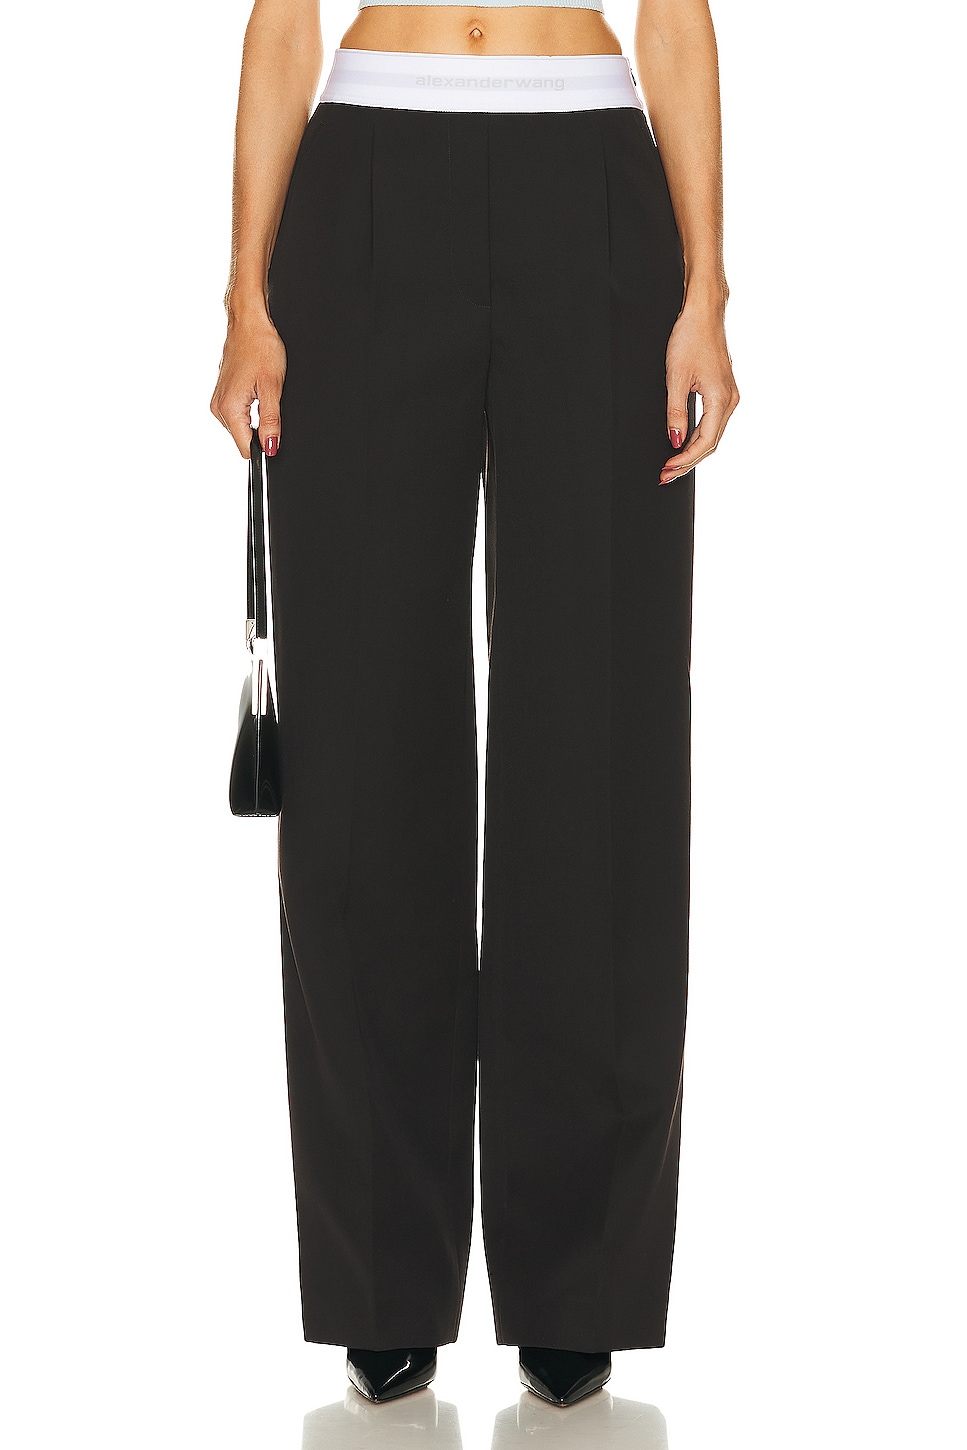 Image 1 of Alexander Wang High Waisted Pleated Trouser in Fig Brown